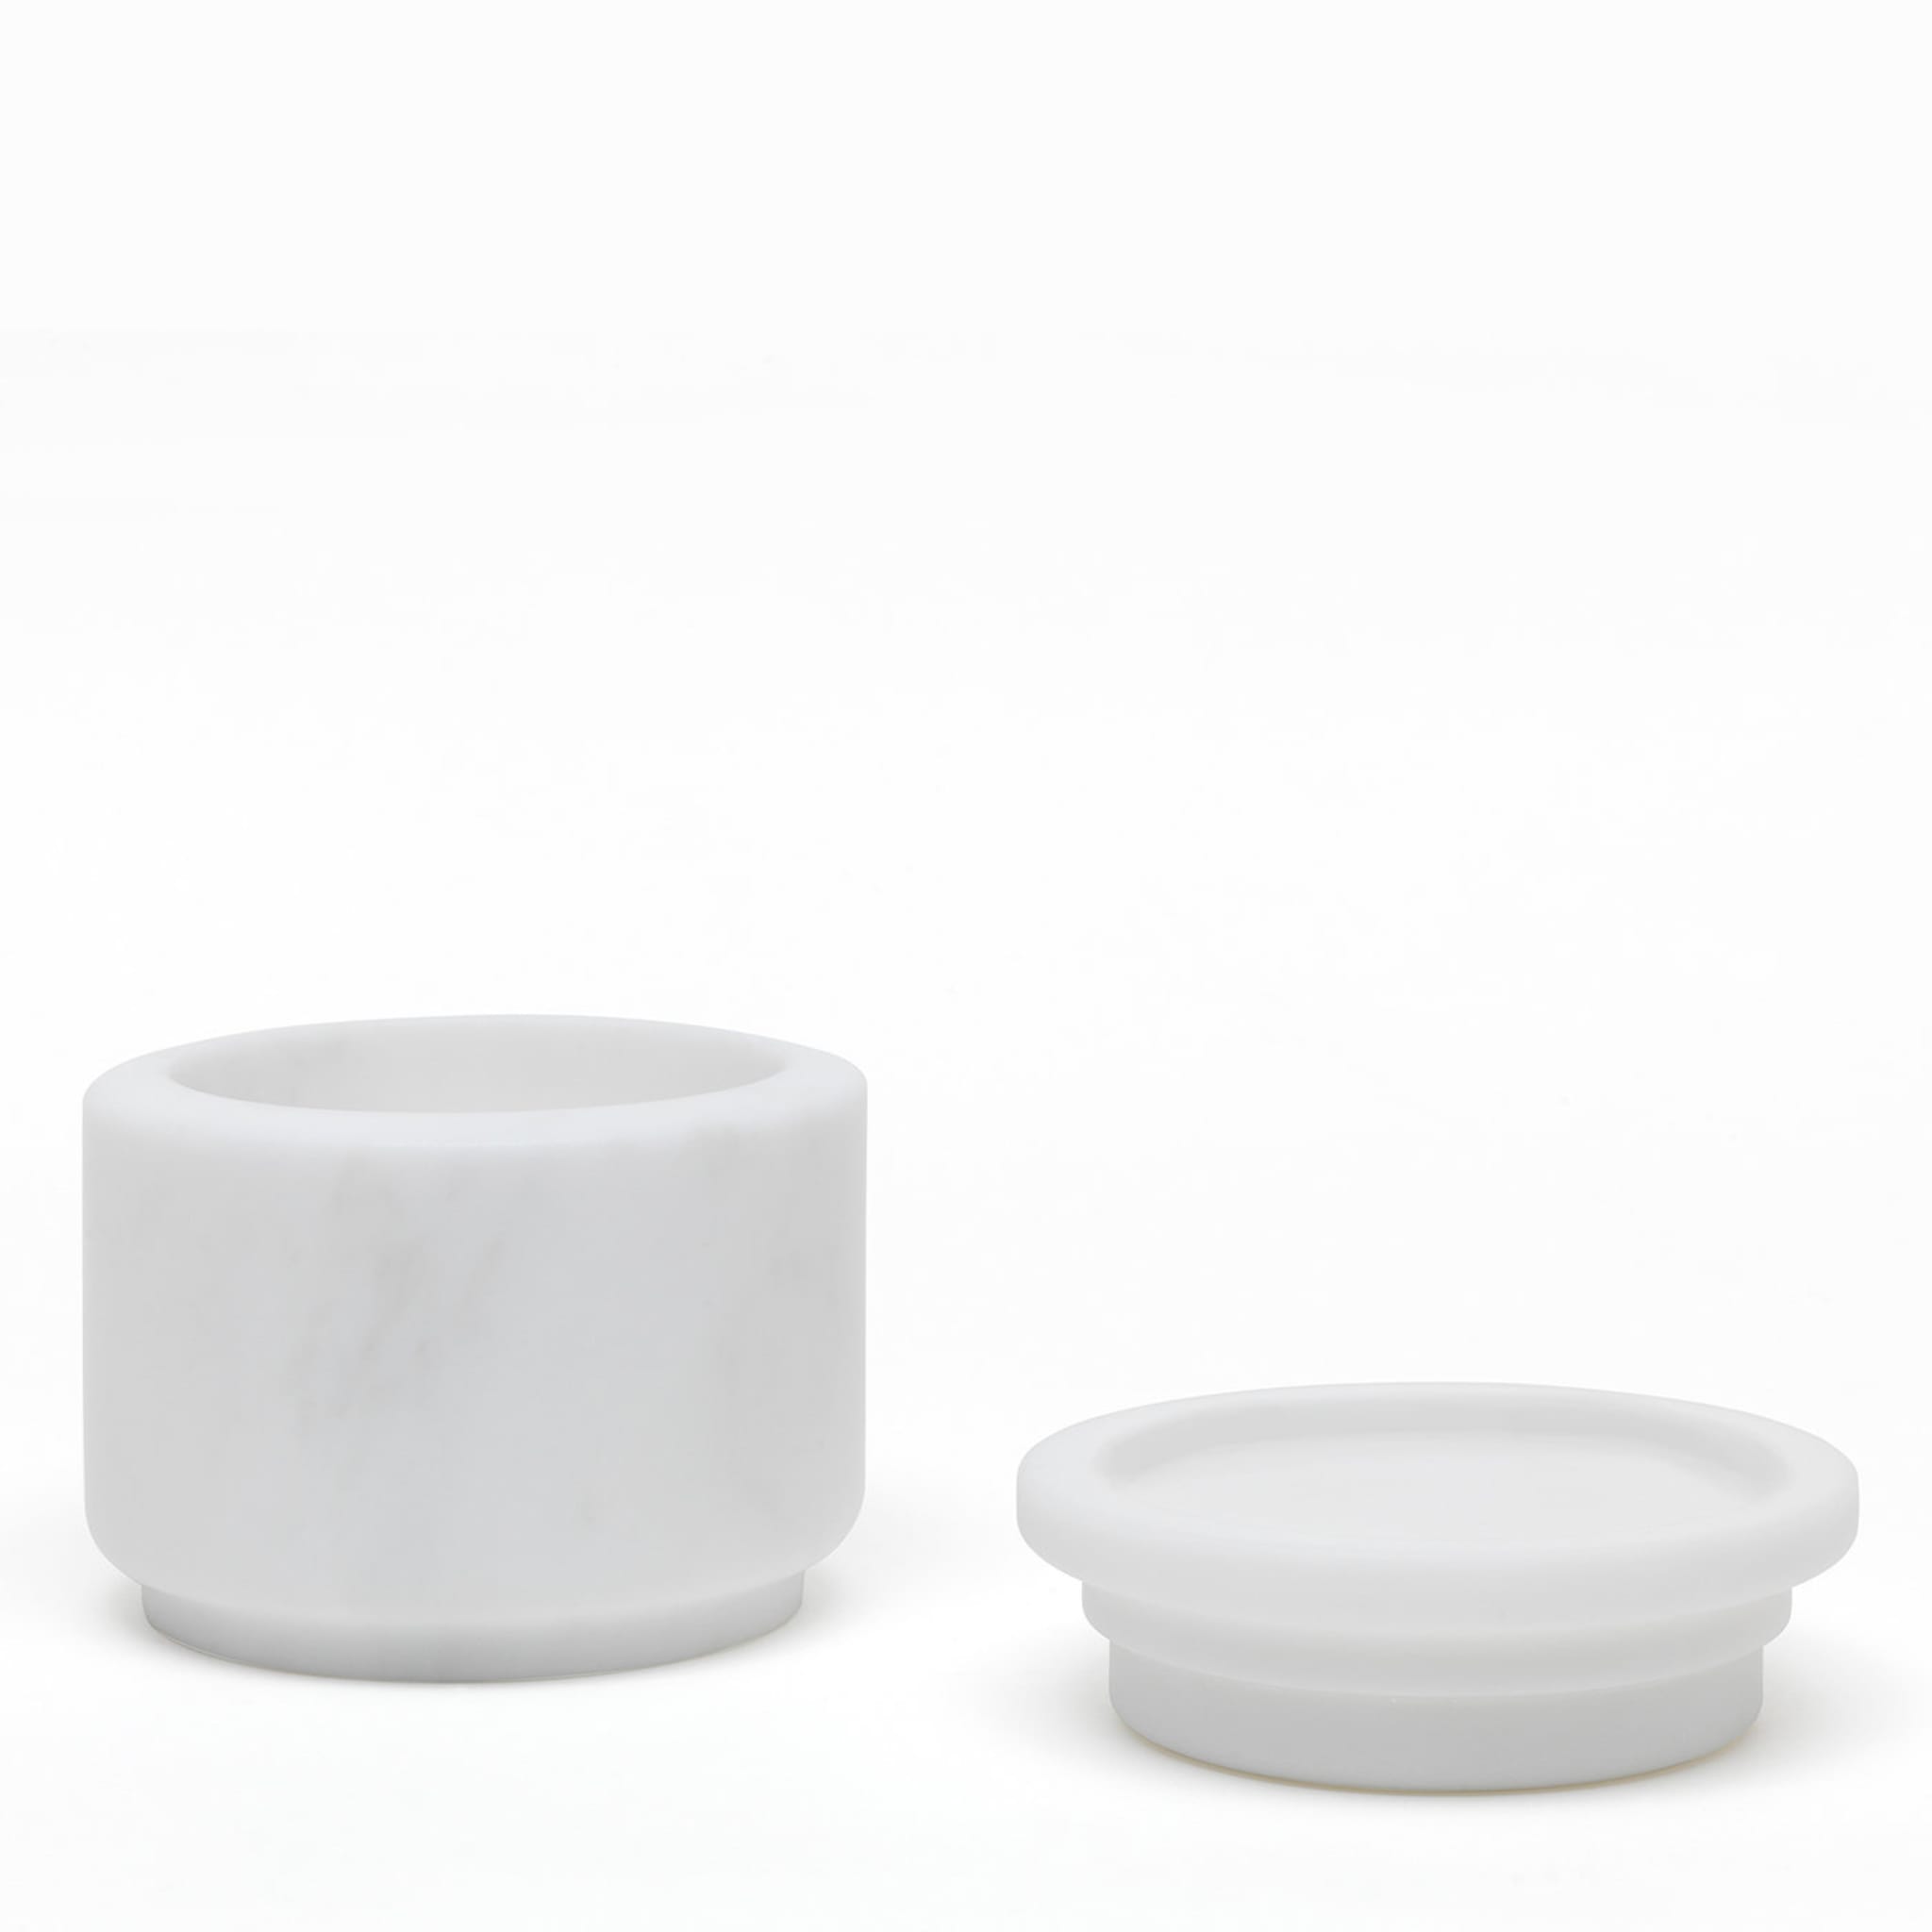 Pyxis Small White Michelangelo Jar by Ivan Colominas - Alternative view 5